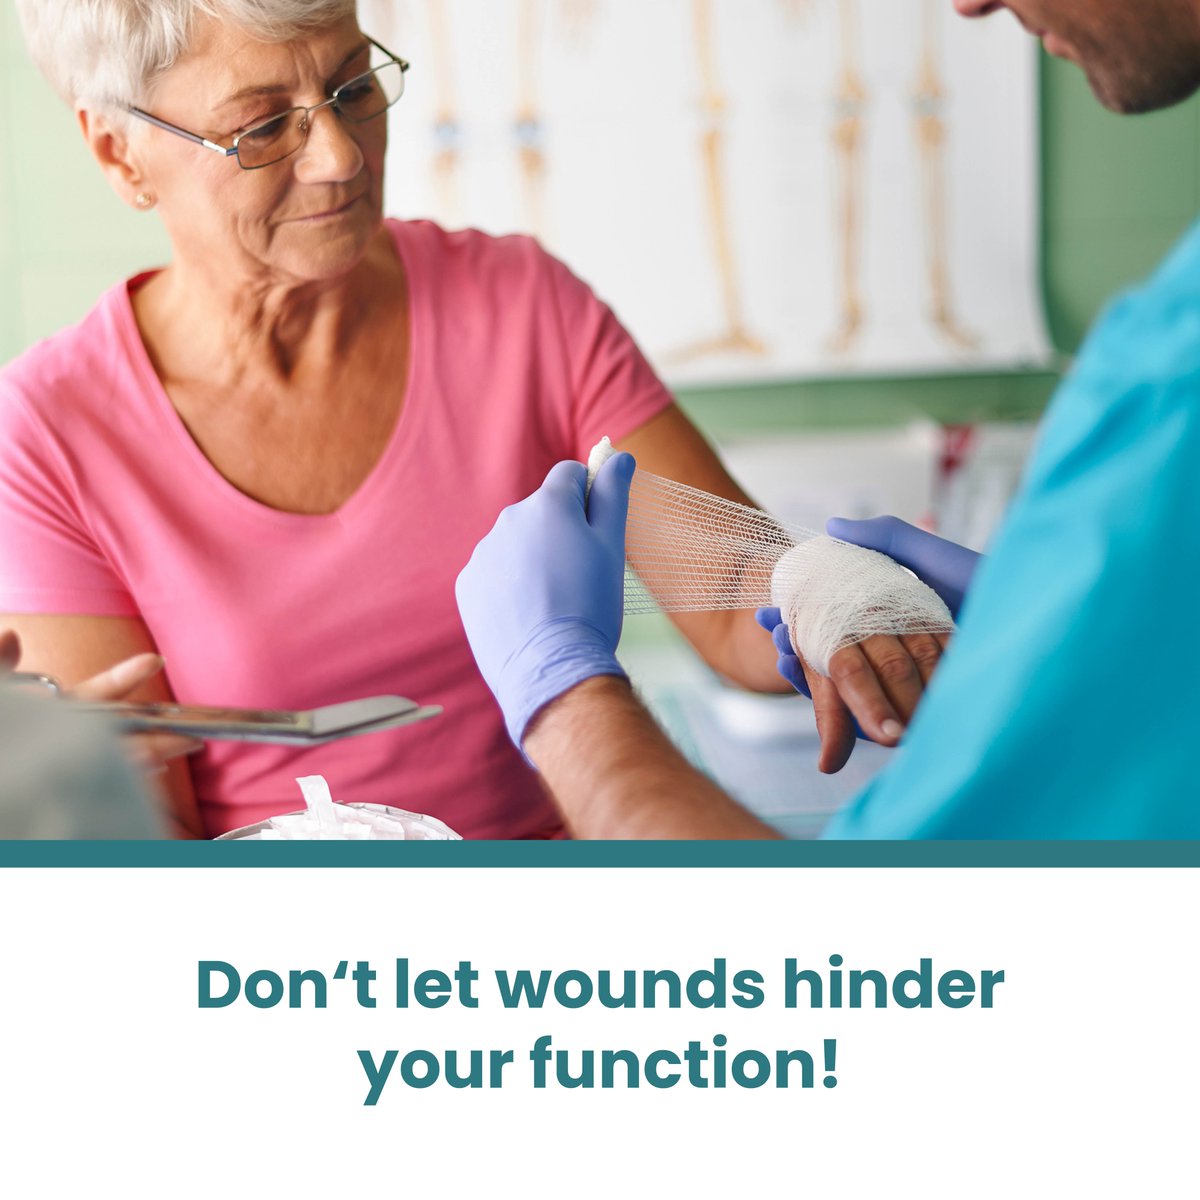 Proper wound care is essential for your well-being. Our expert treatment nurses, alongside medical professionals, provide personalized care from identification to healing.

Visit our website for more.

#SeniorCare #LTC #STC #WoundCare